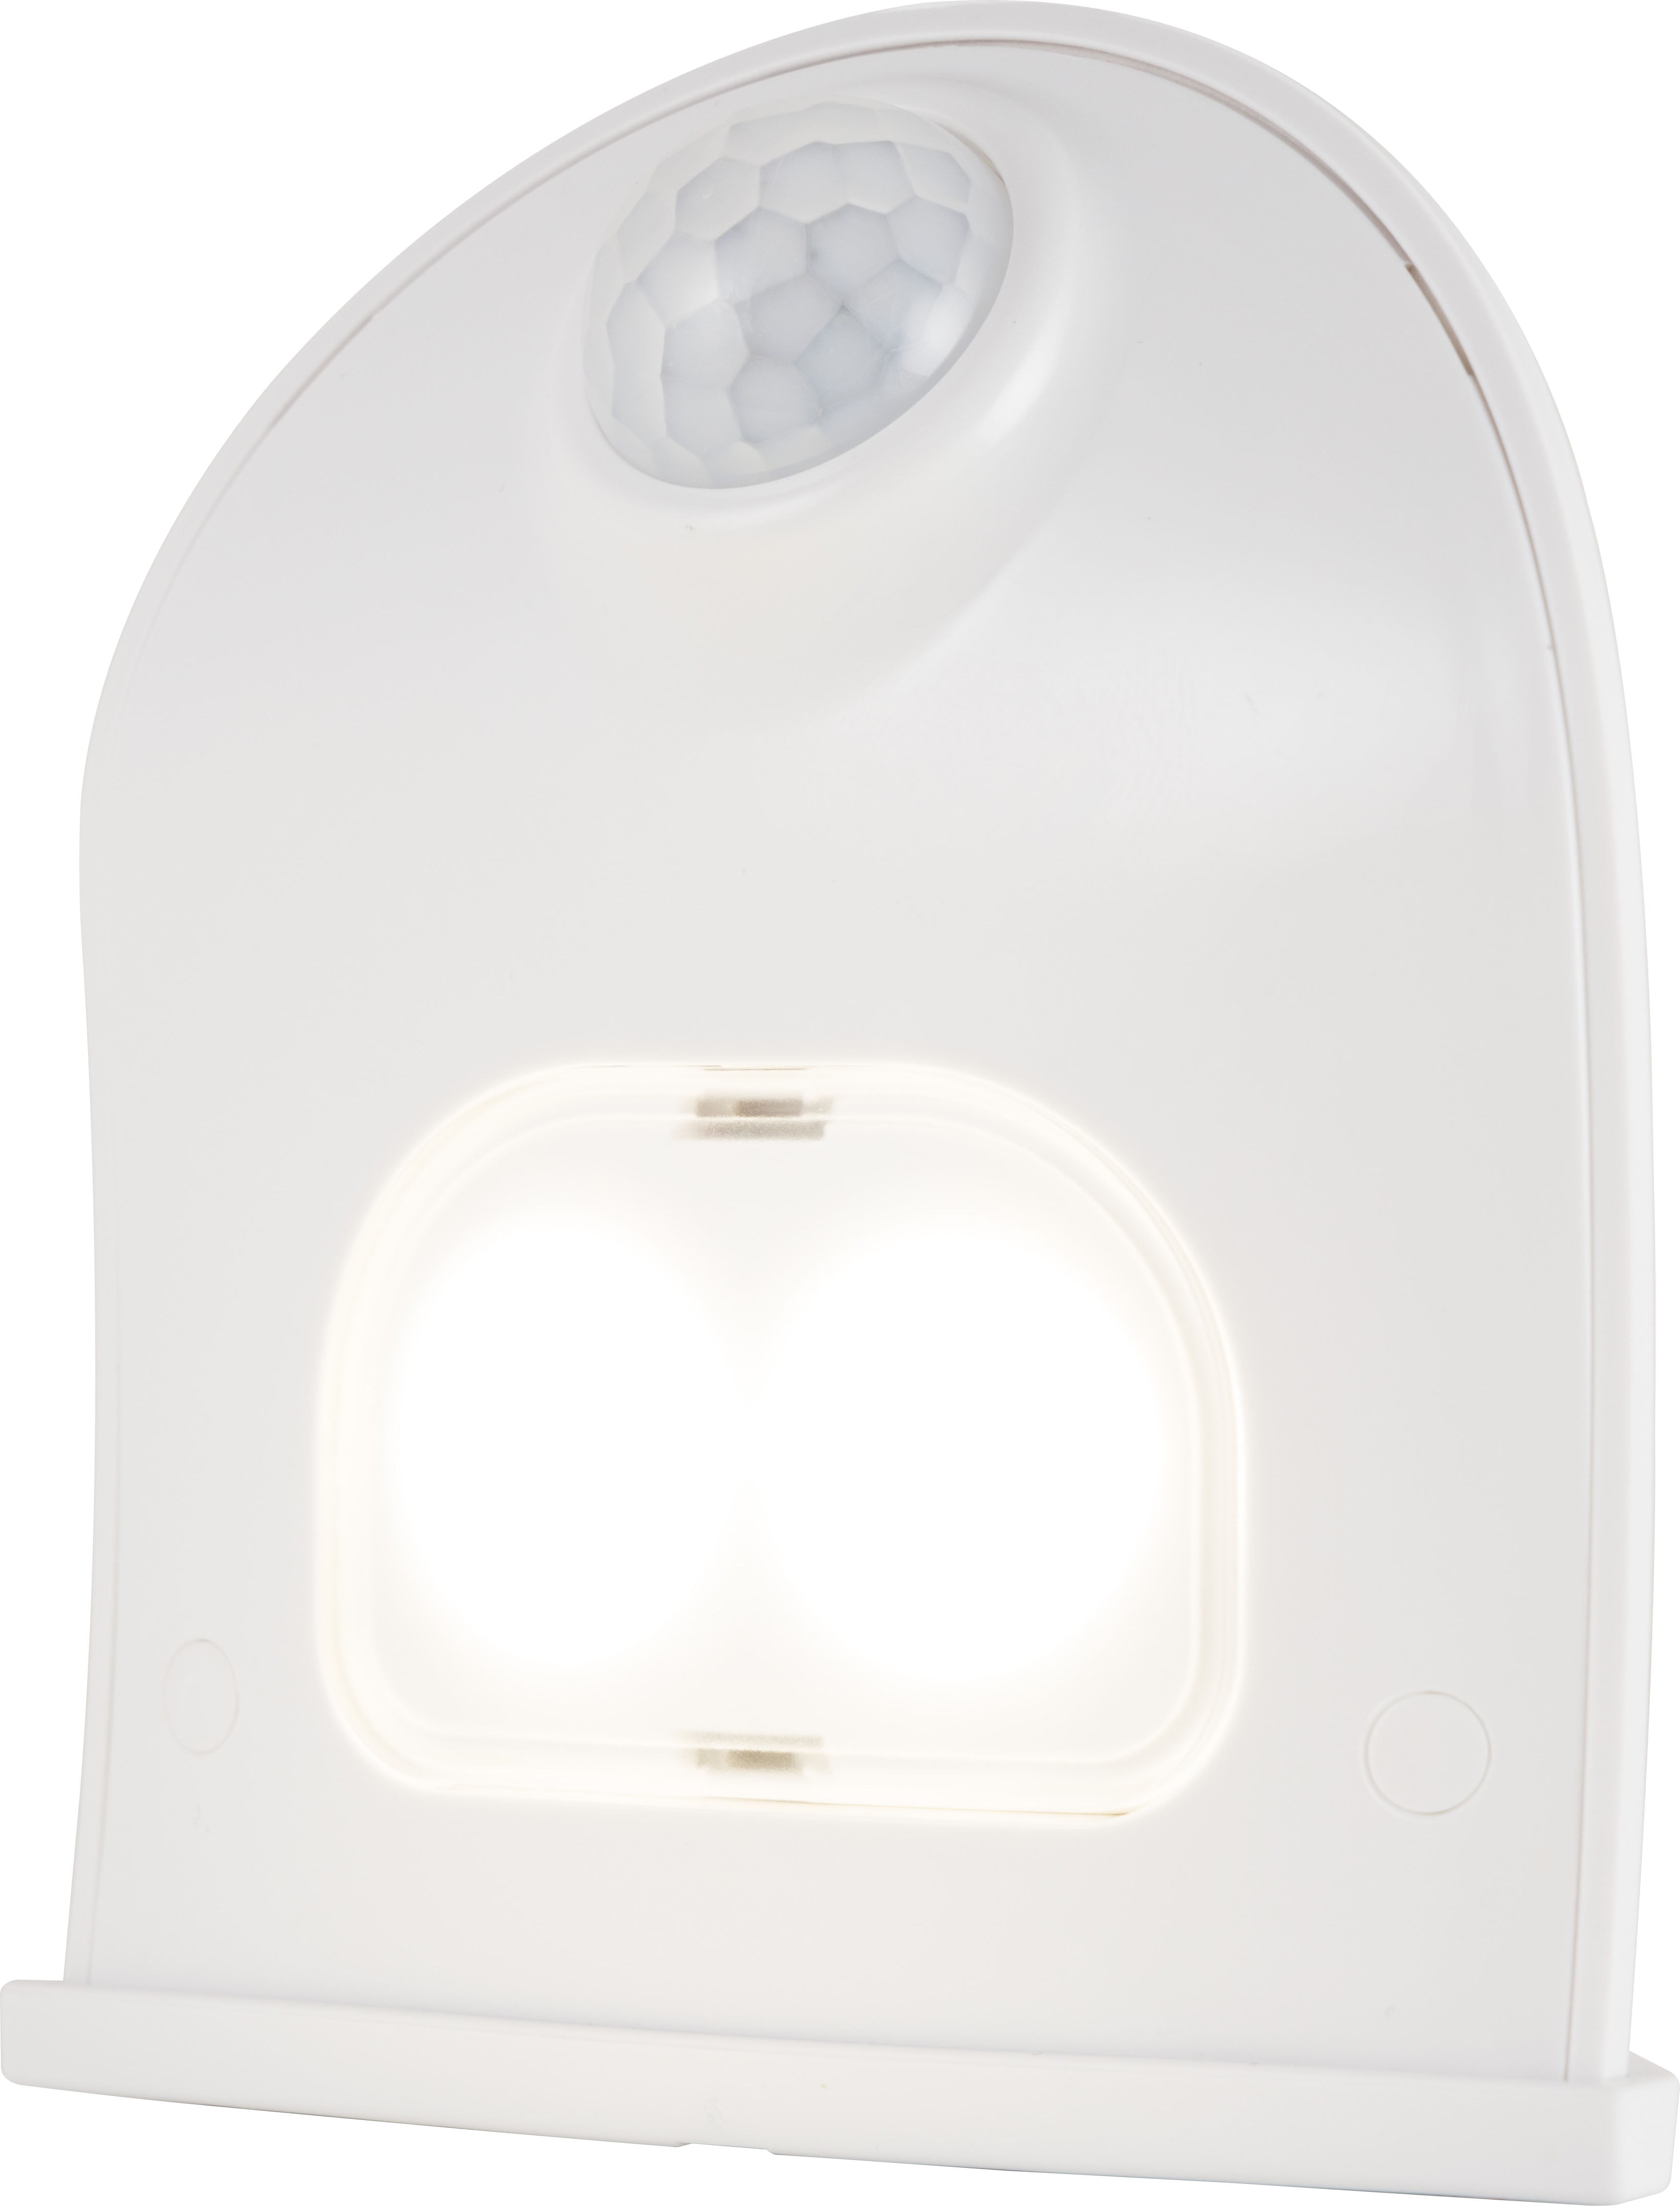 Energizer LED Motion Activated Indoor/Outdoor Path Light, White